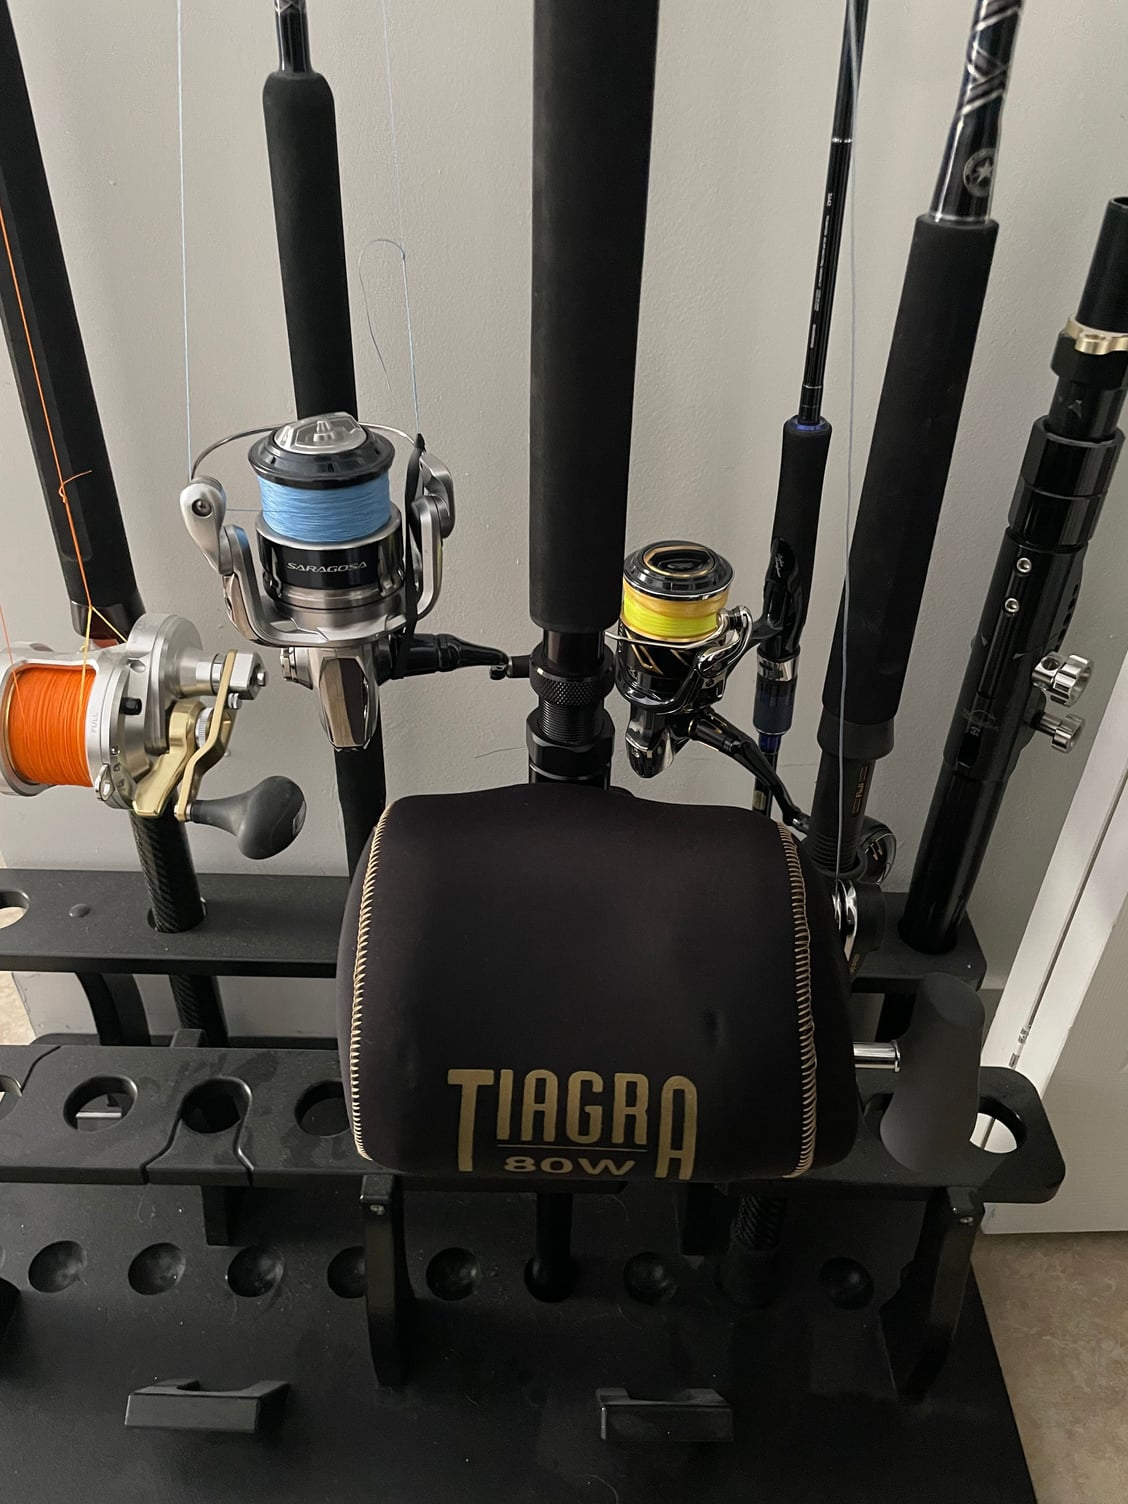 Tiagra 80w Custom rod/Winthrop butt - The Hull Truth - Boating and